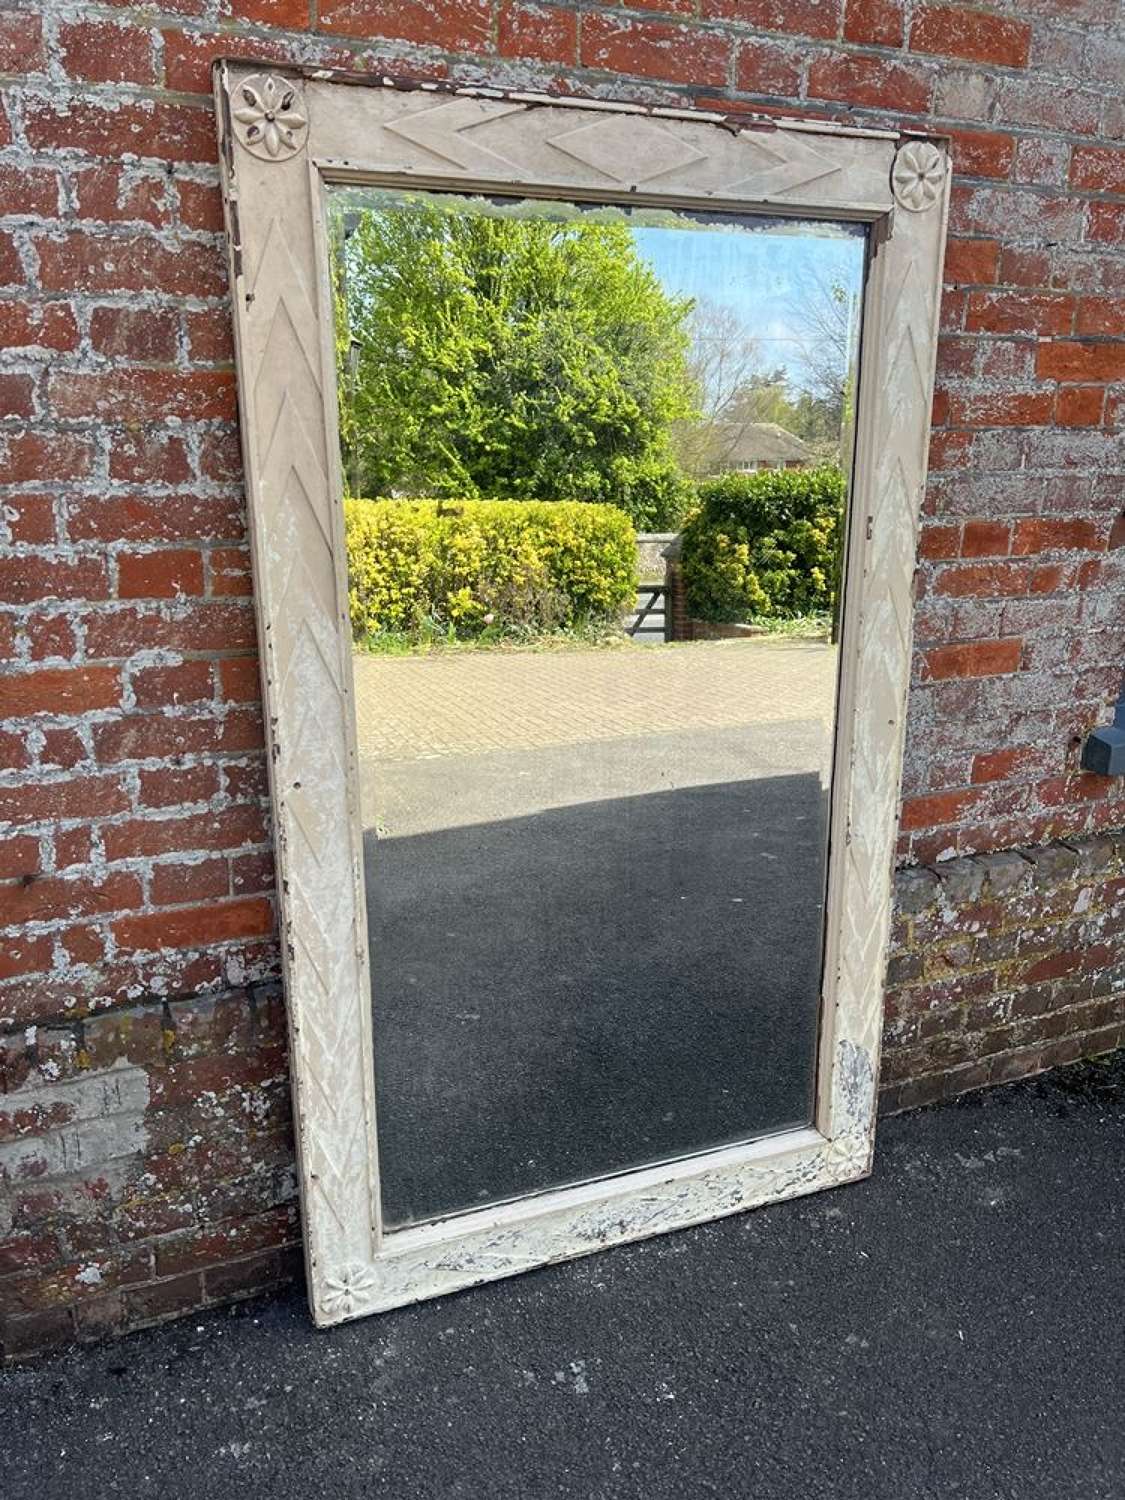 A Fabulous large Antique Swedish carved wood distressed painted Mirror